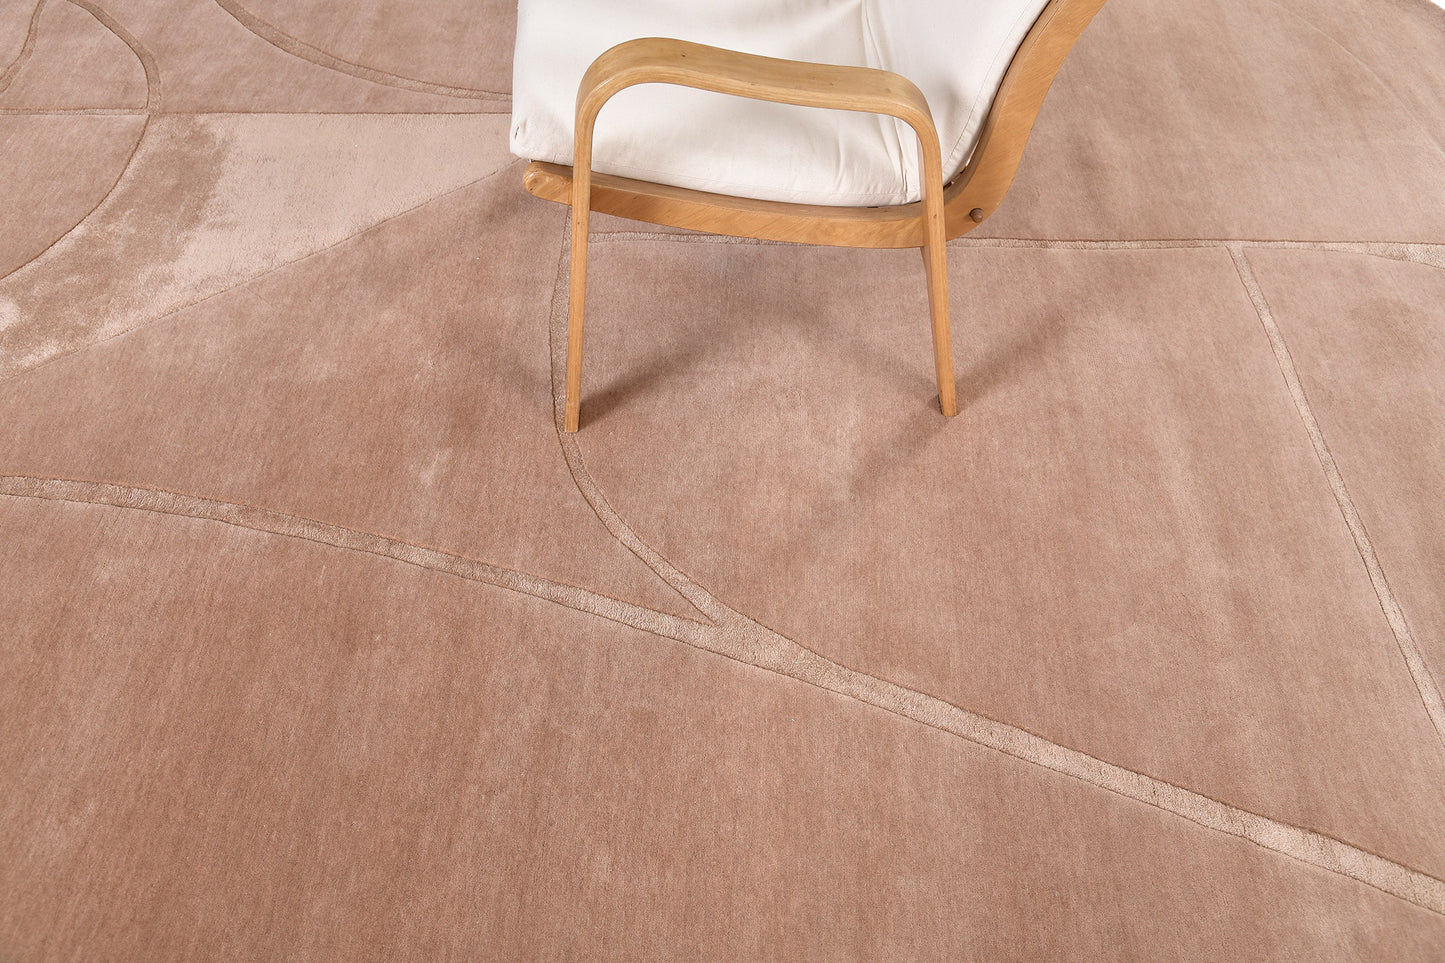 Modern Rug Image 3996 Contour by Claudia Afshar